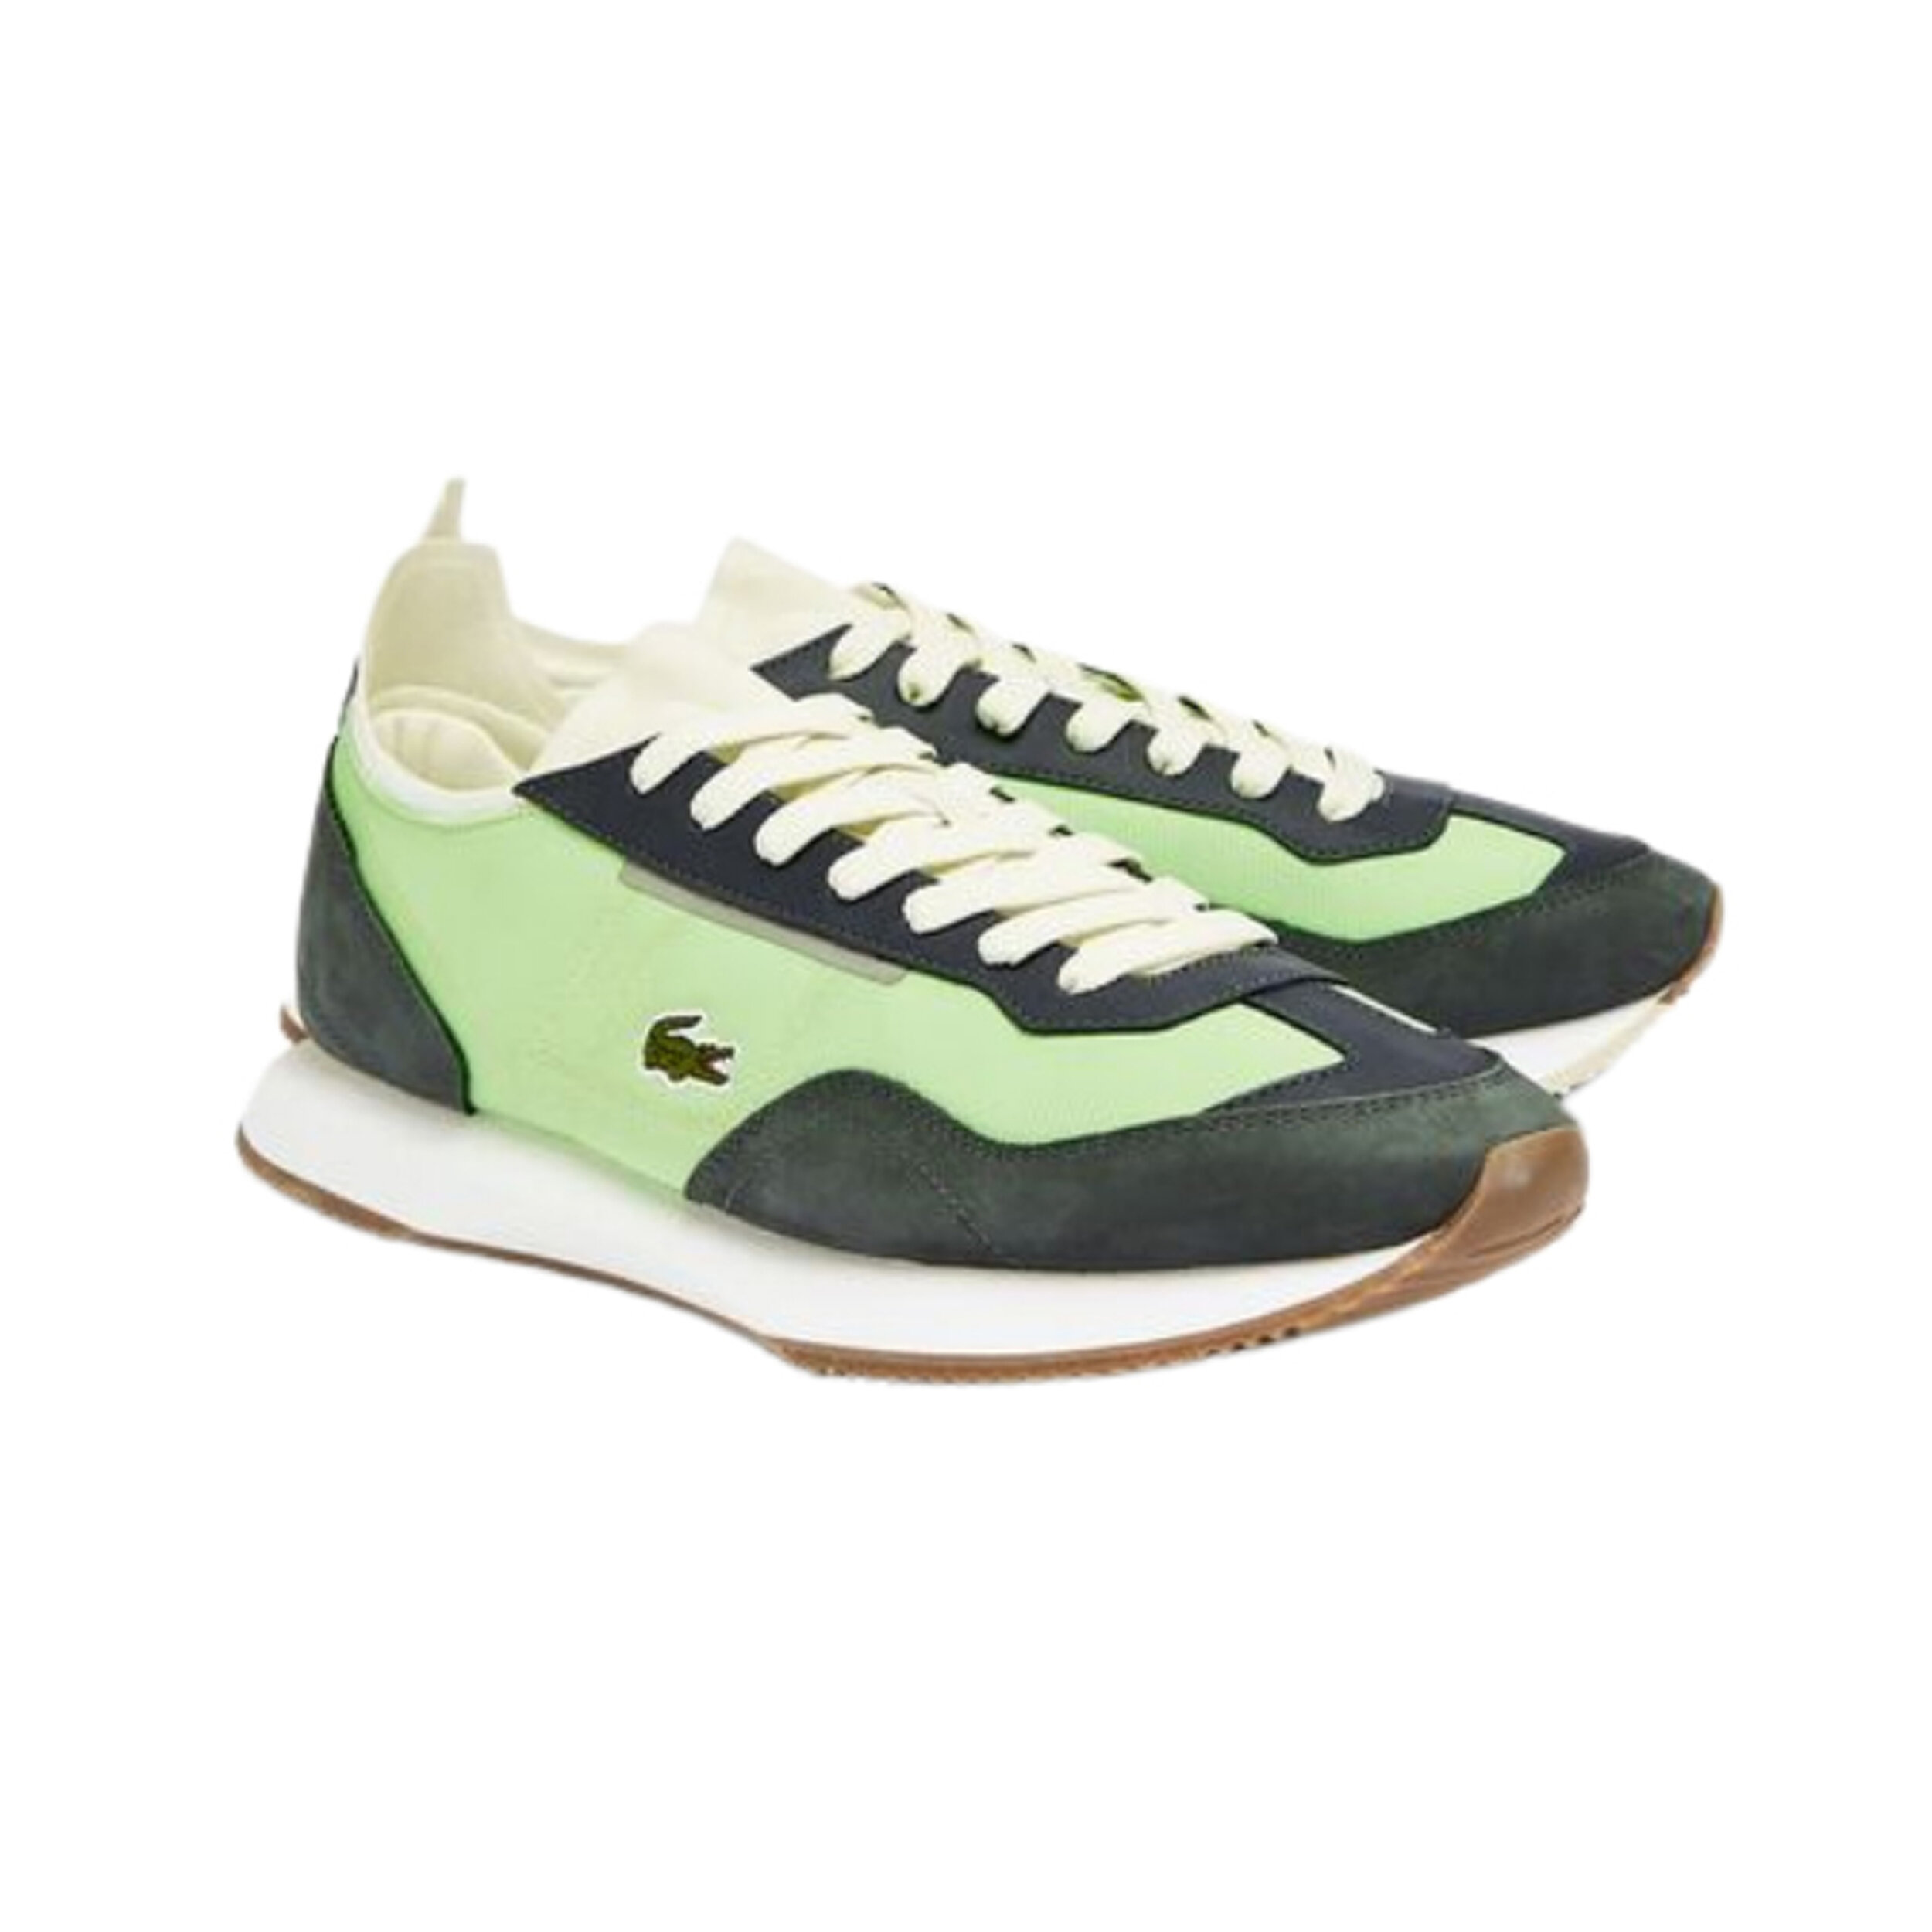  Mens Match Break Textile and Nubuck Sneakers Large, Lacoste P8,250 